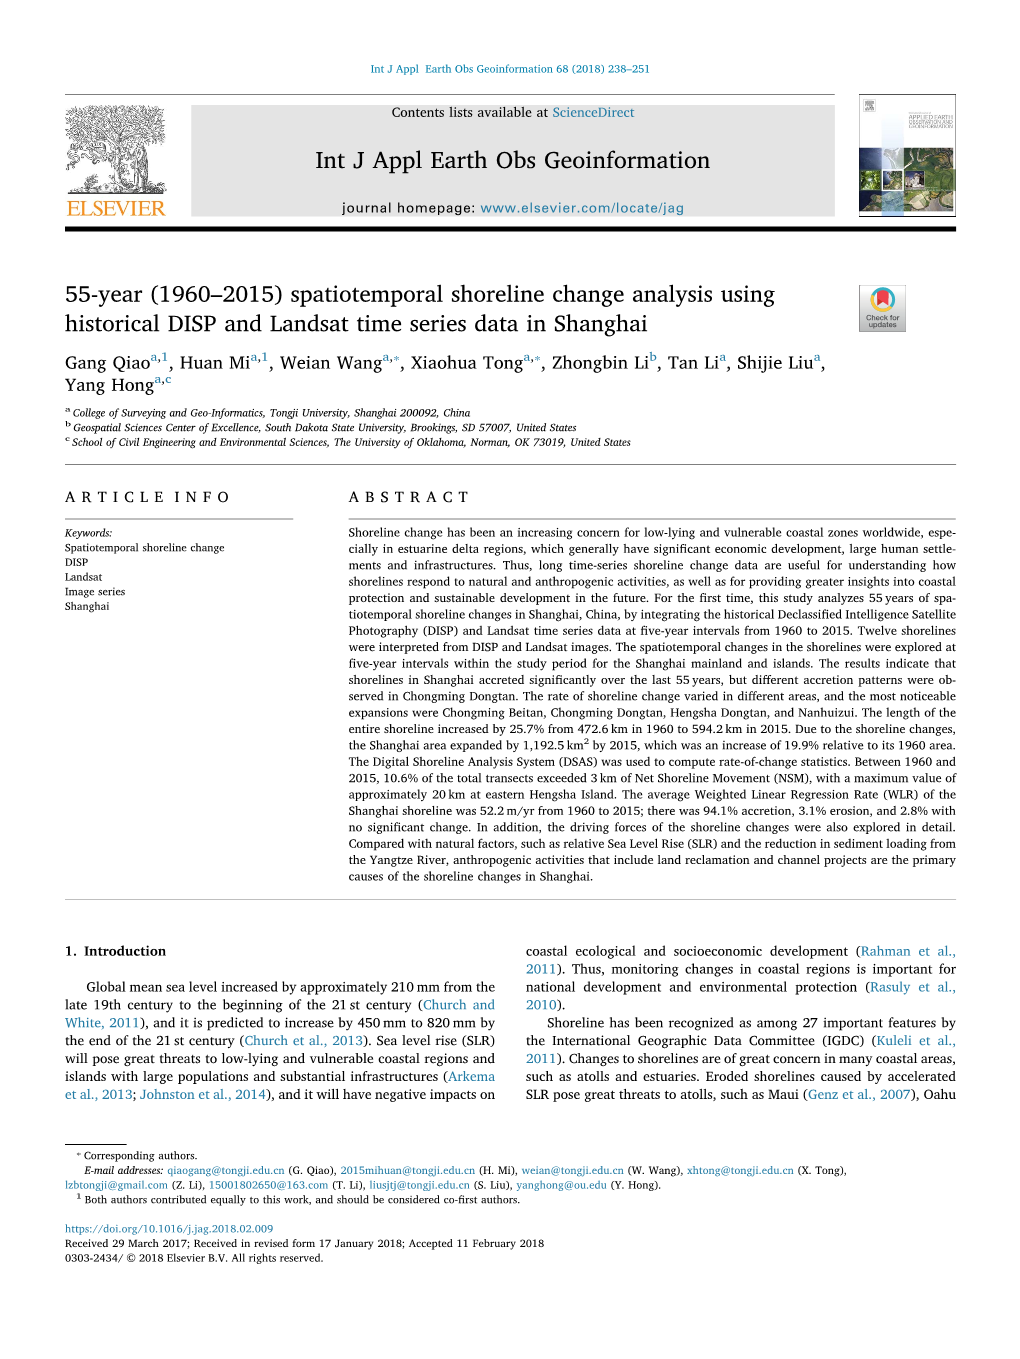 Spatiotemporal Shoreline Change Analysis Using Historical DISP And